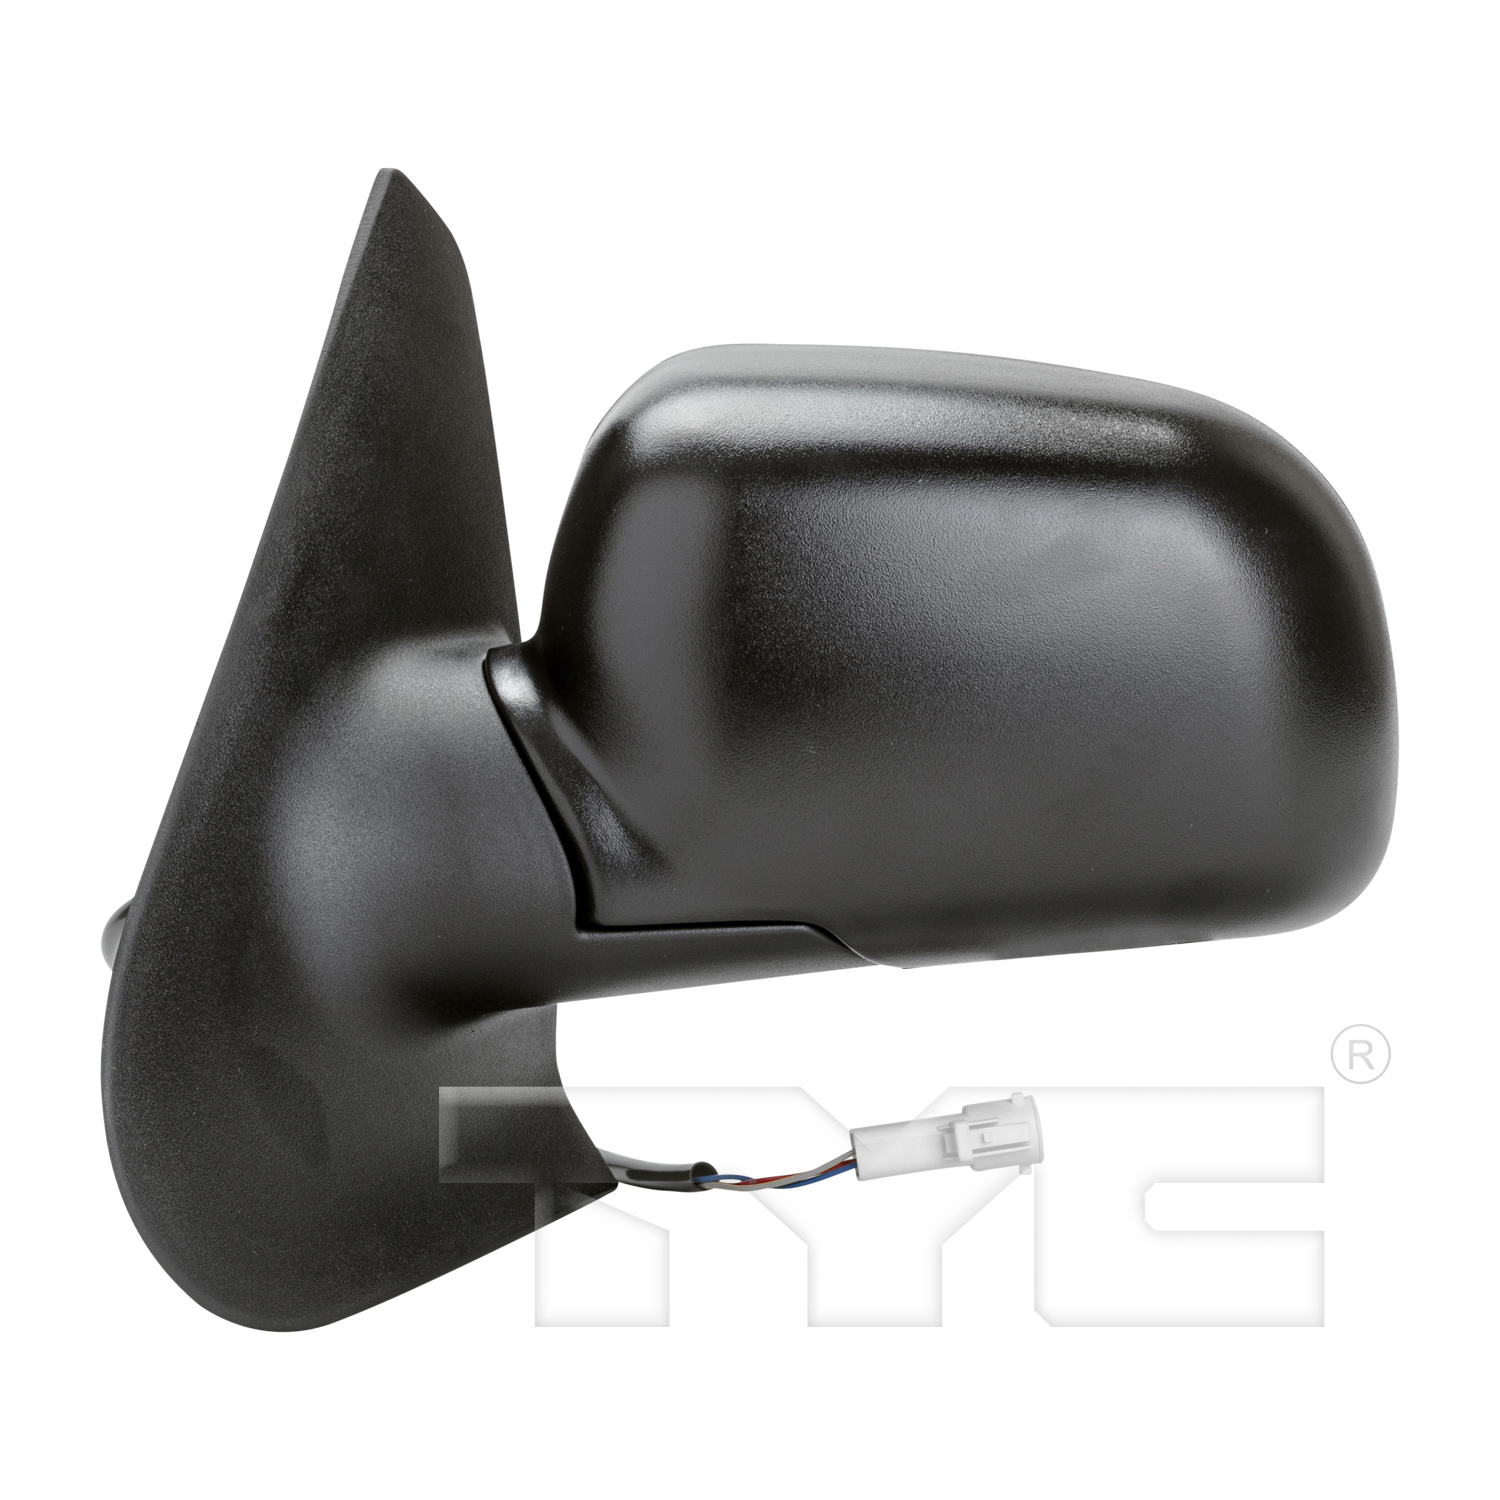 Aftermarket MIRRORS for FORD - EXPLORER SPORT TRAC, EXPLORER SPORT TRAC,01-05,LT Mirror outside rear view